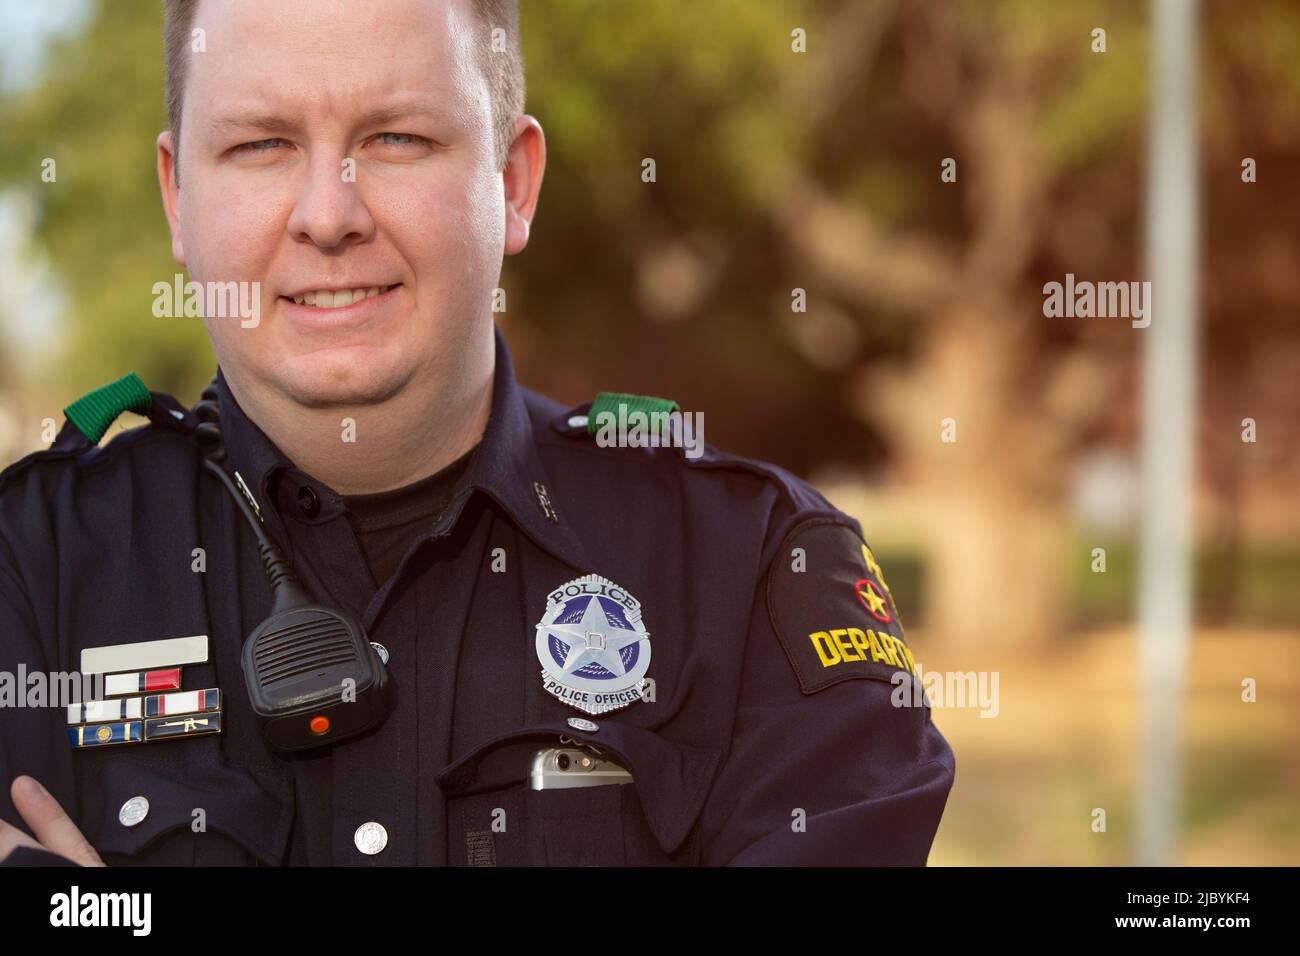 Portrait of Police officer standing outside with arms crossed looking towards camera smiling Stock Photo